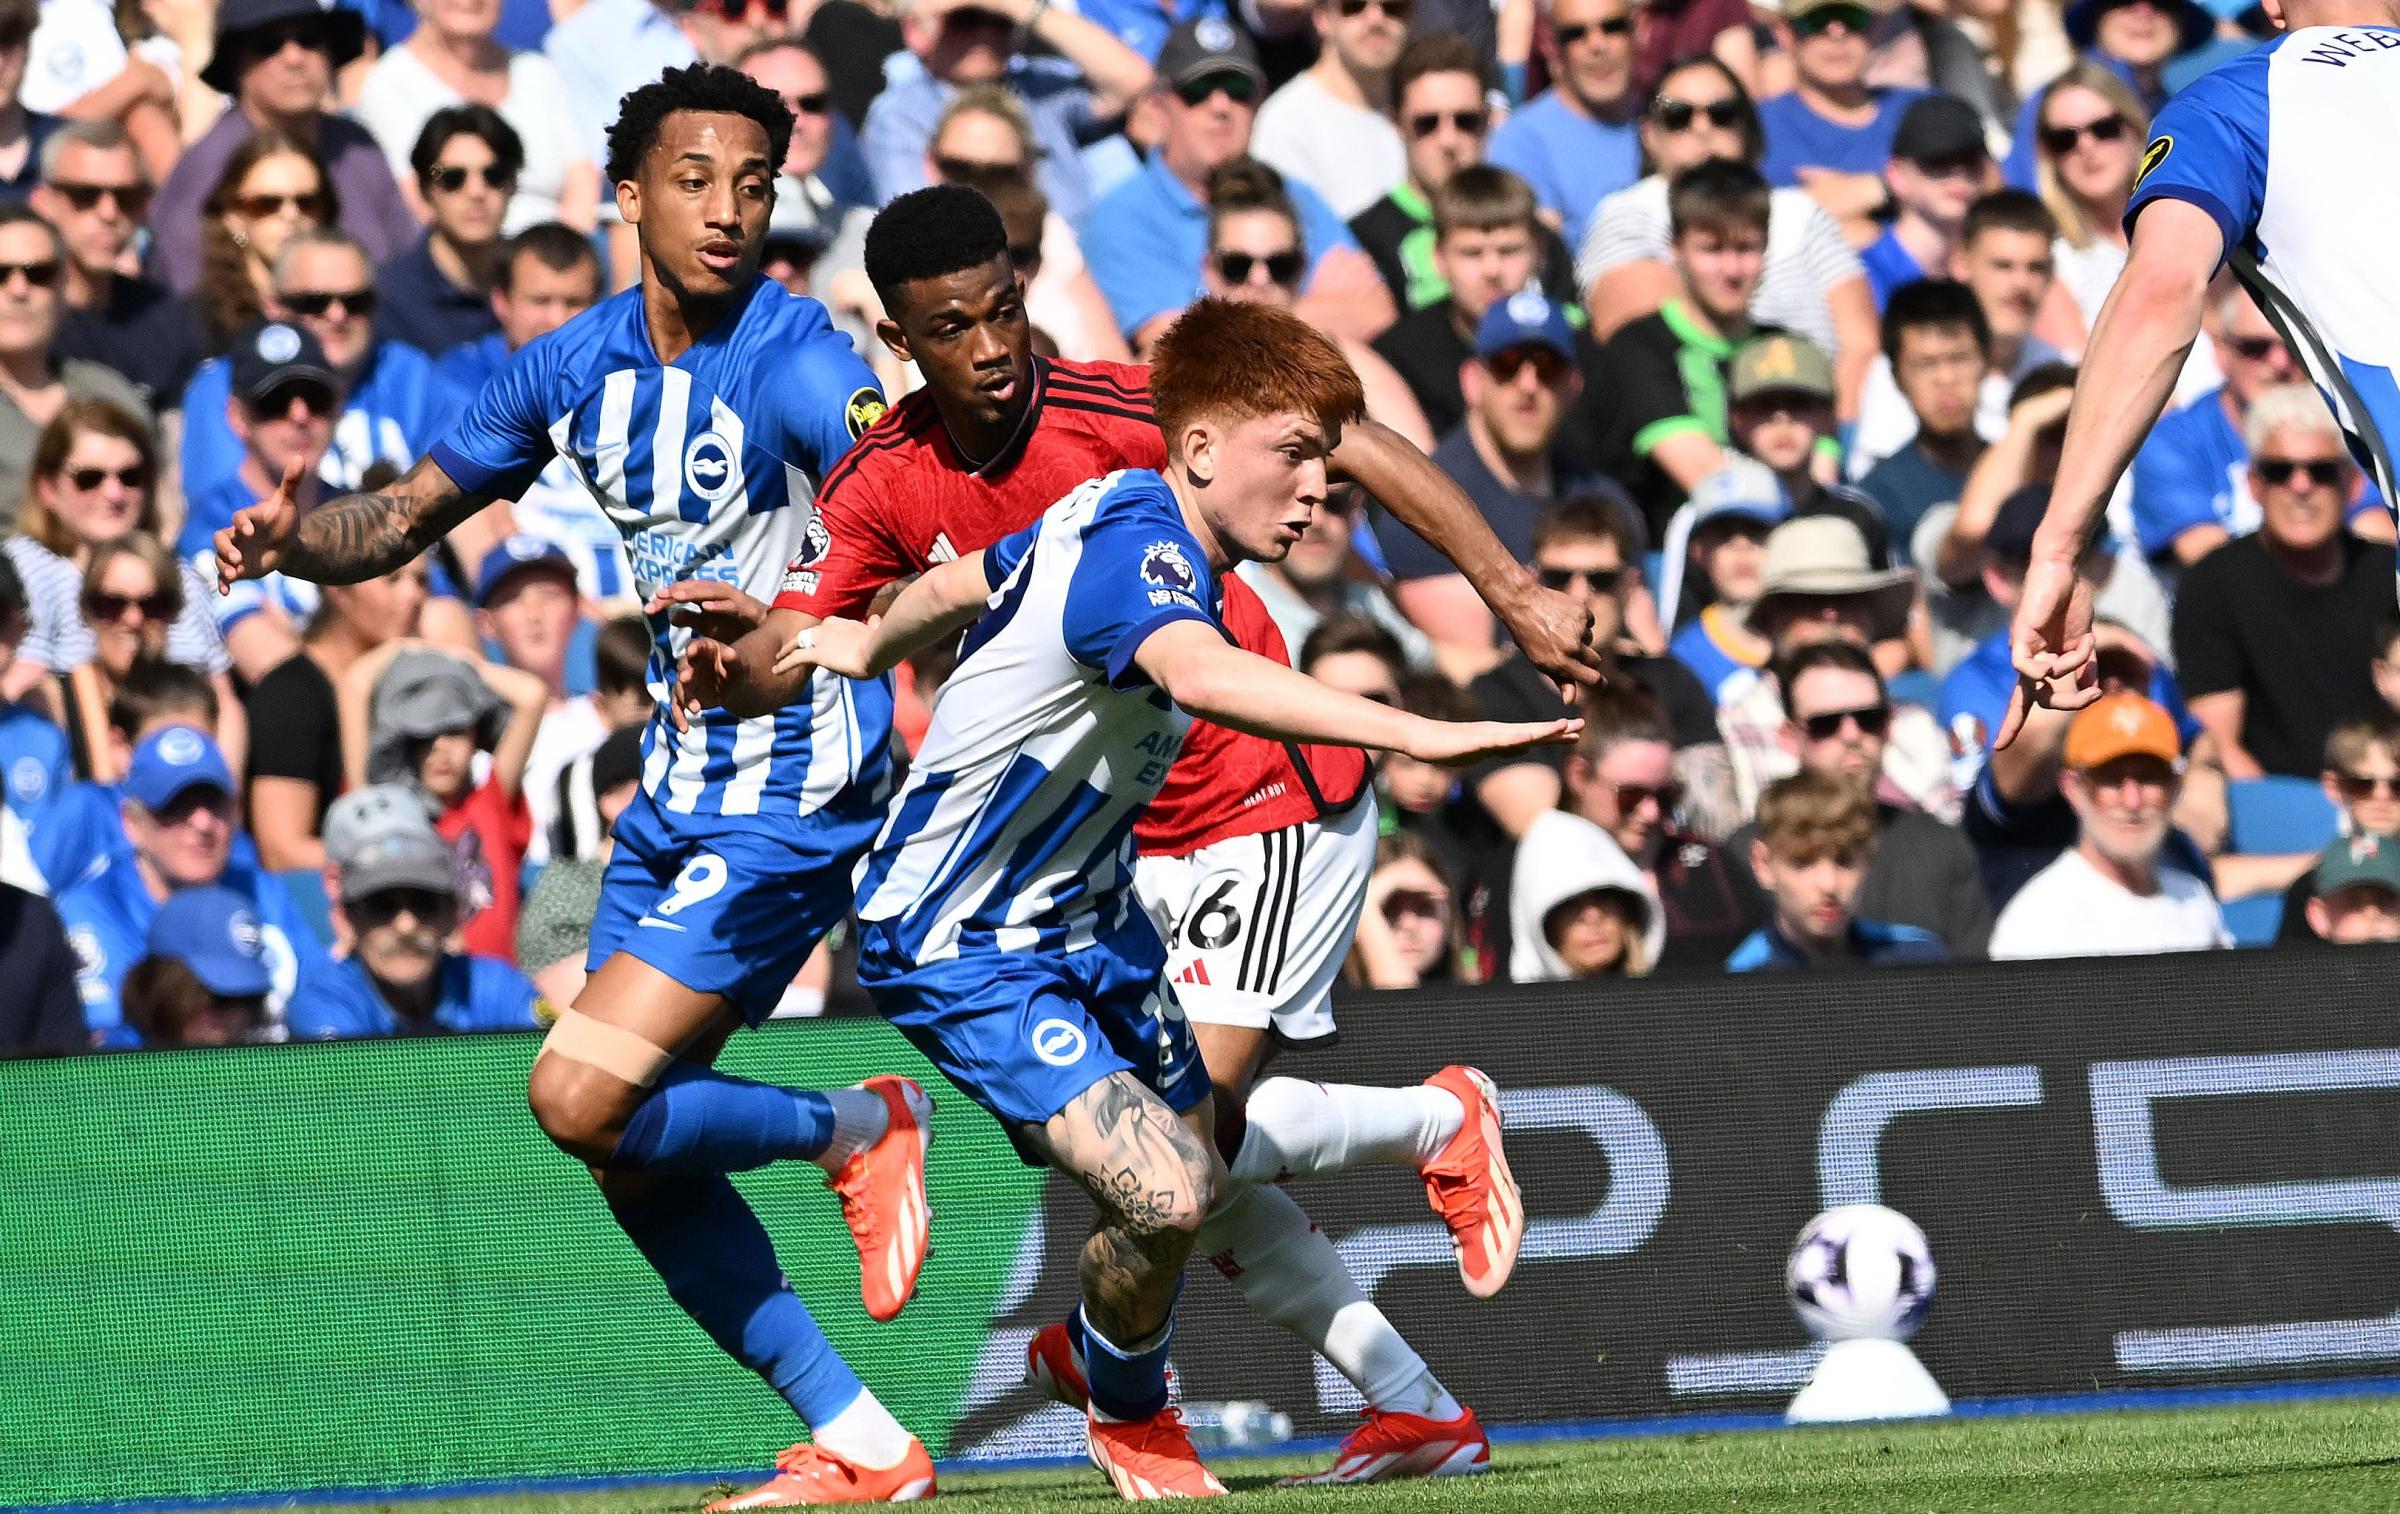 TNT Sports to show Brighton matches with Manchester United, Arsenal